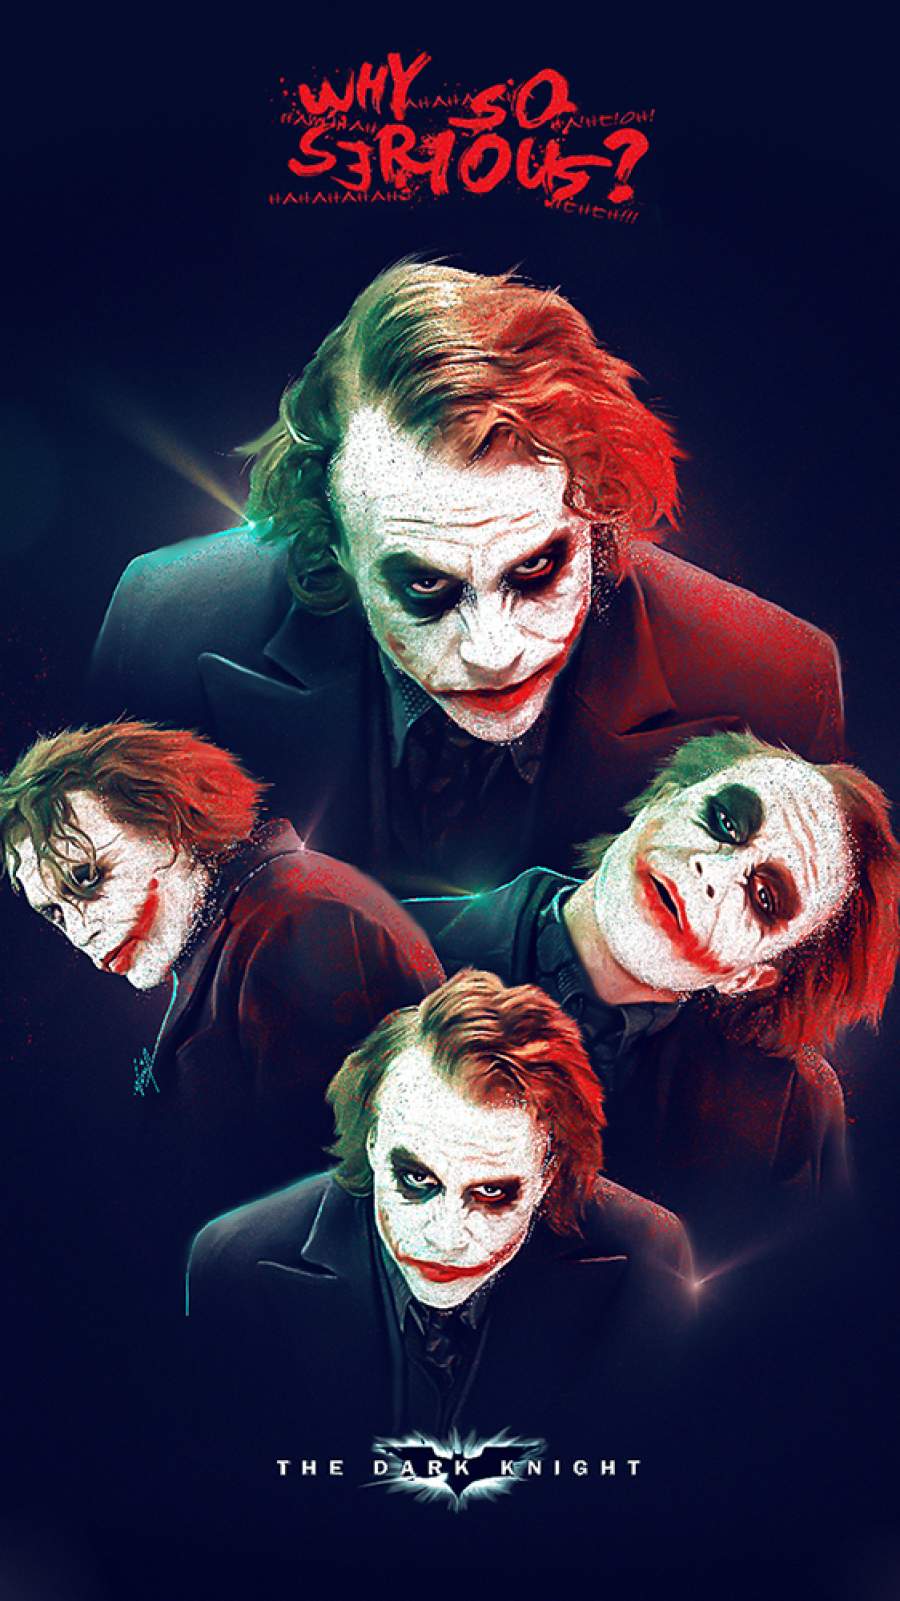 Why So Serious IPhone Wallpaper Wallpaper, iPhone Wallpaper